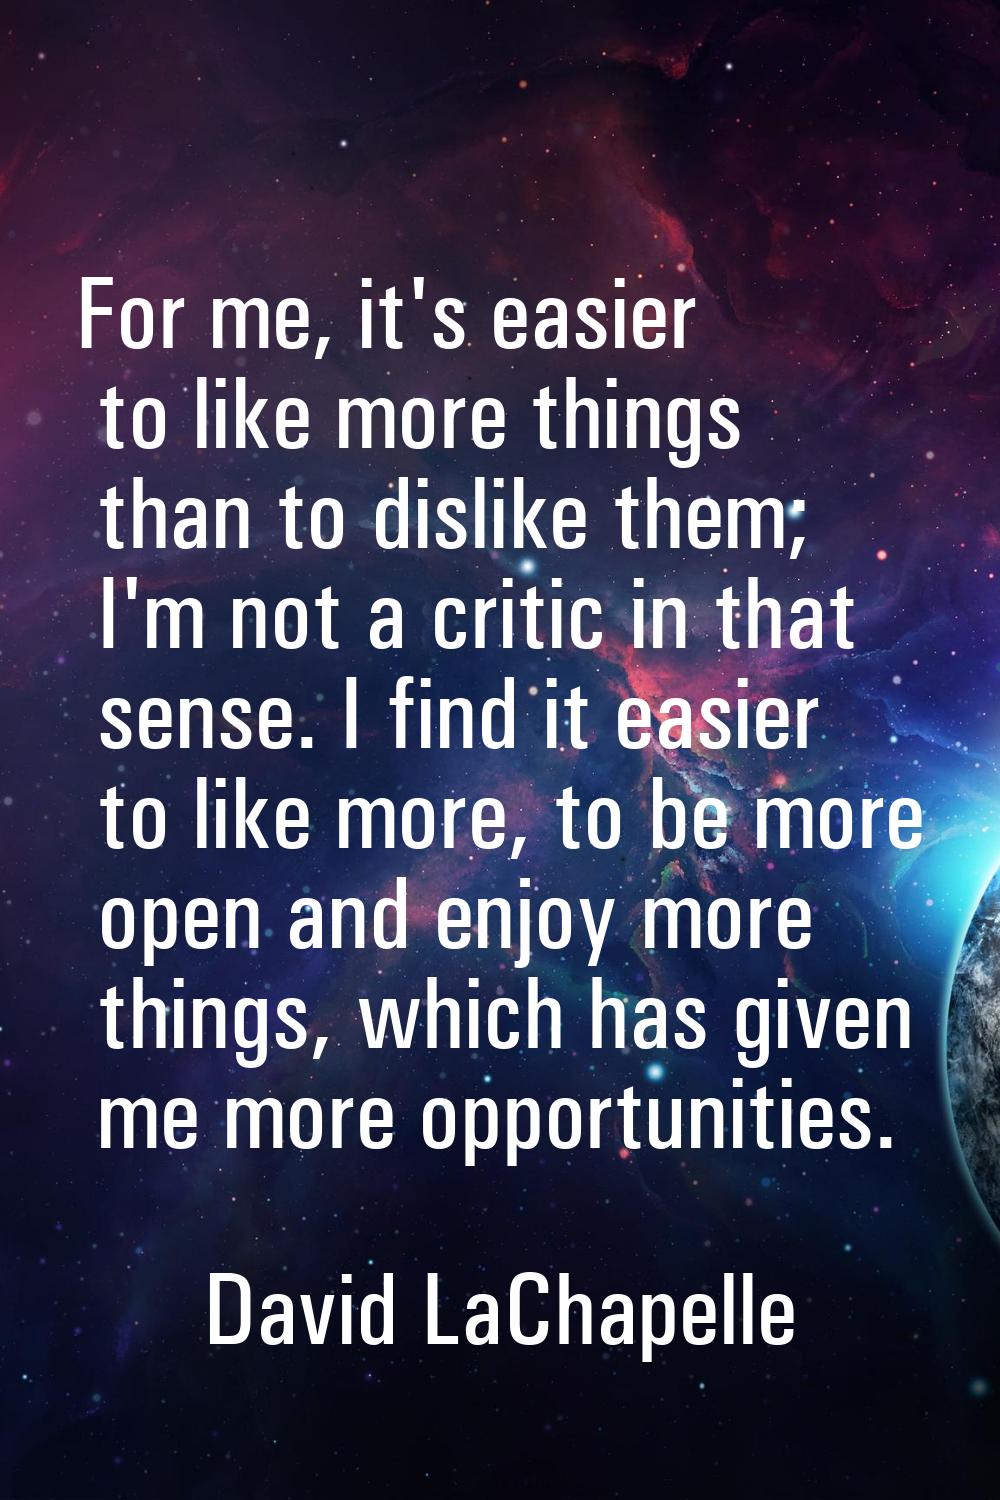 For me, it's easier to like more things than to dislike them; I'm not a critic in that sense. I fin